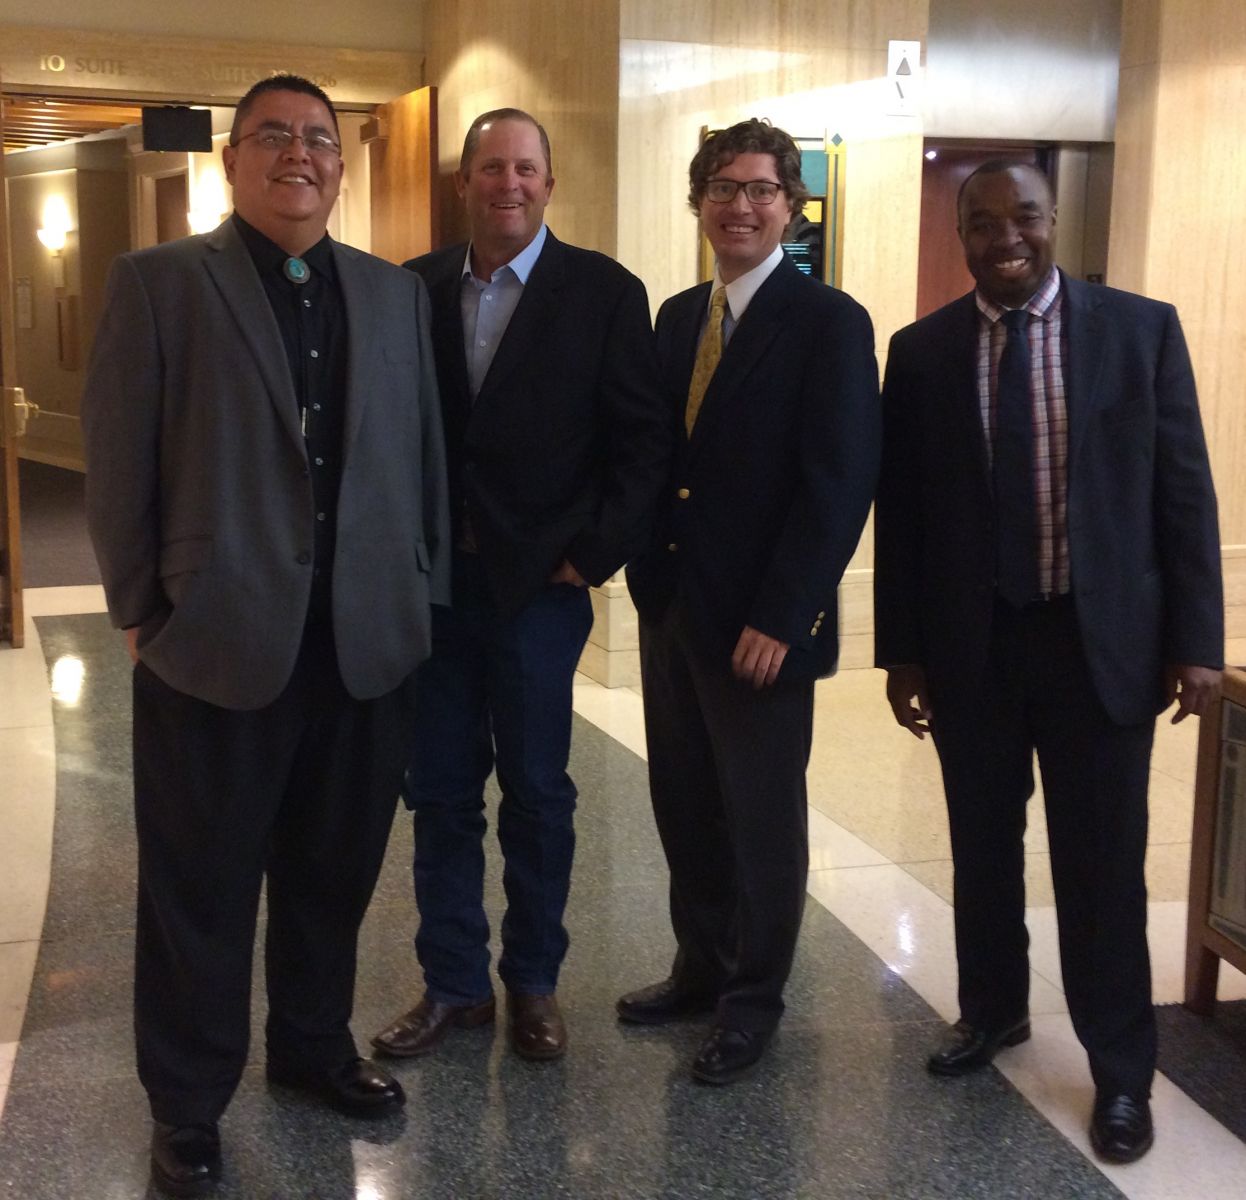 Left to right: Michael Sage, GGEDC; Roger Montano, Gallup Pipeline & Compliance Services; Mark Horn, Pinnacle Bank; John Brooks, NMFA